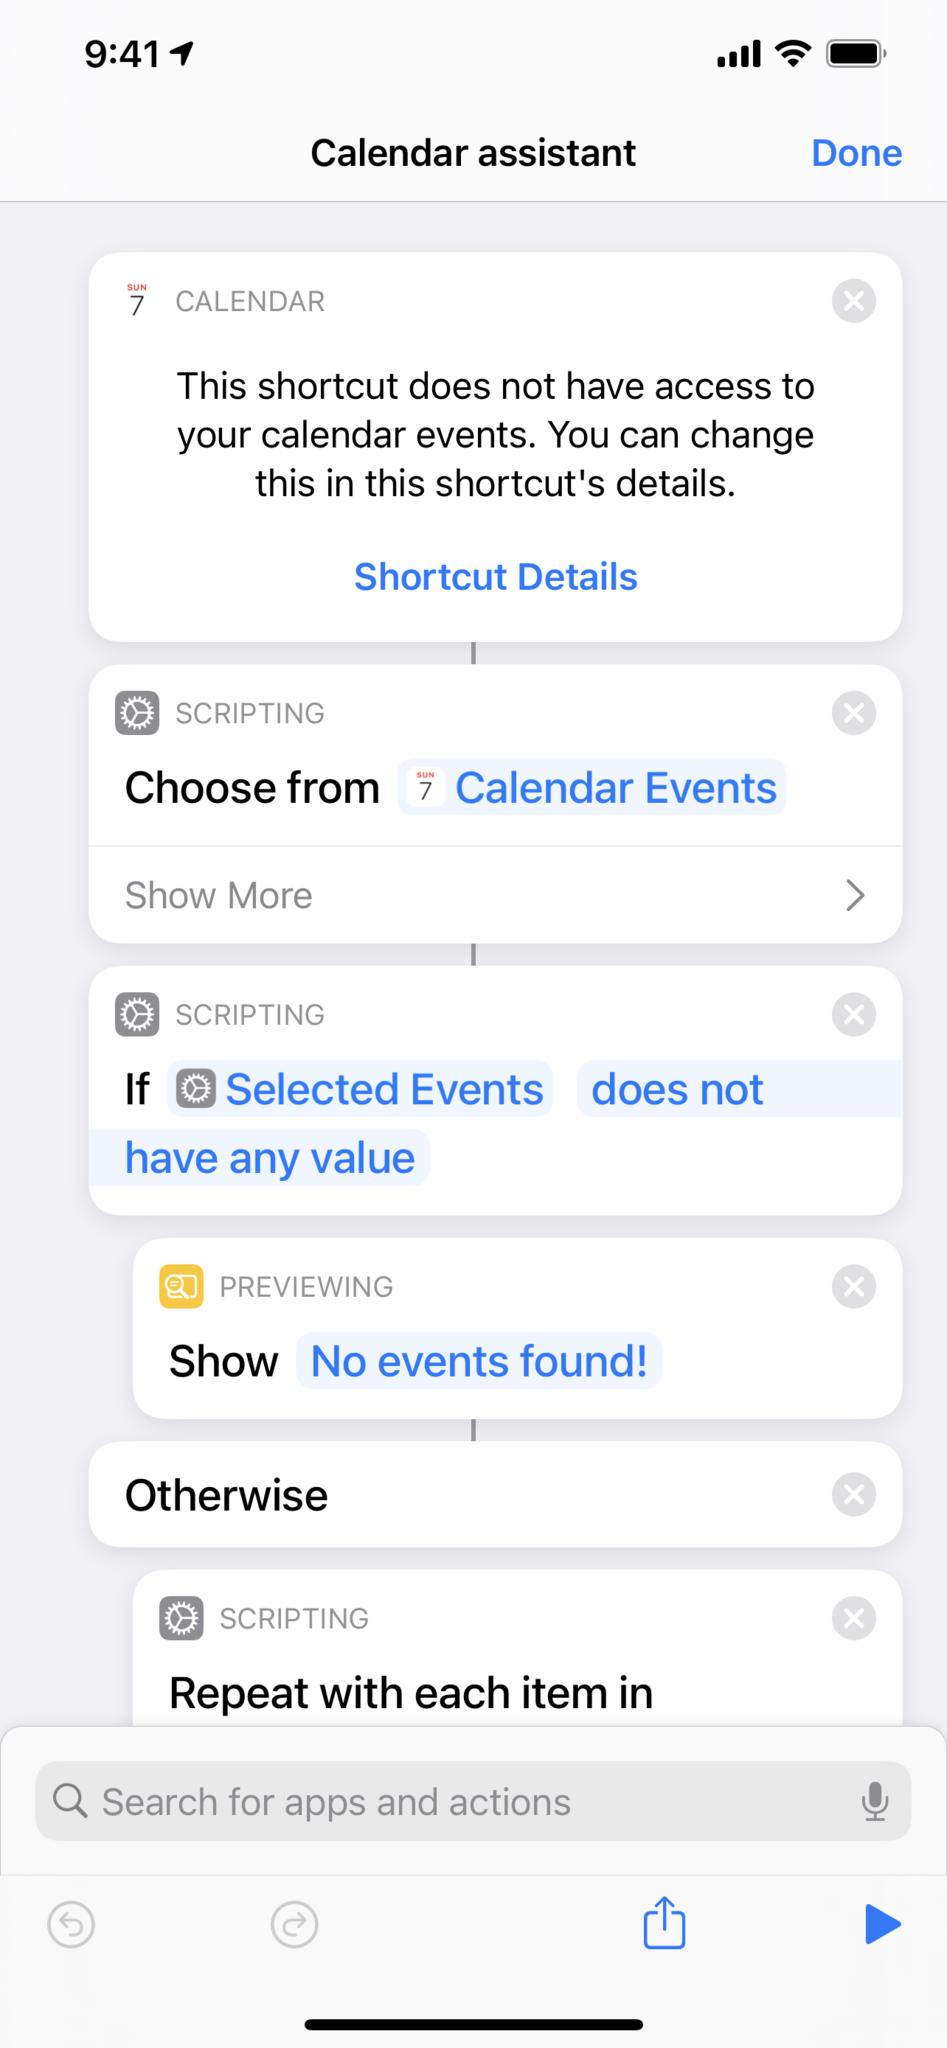 Screenshot of example Calendar Assistant shortcut with a Calendar action that's now available, showing "This shortcut does not have access to your calendar events. You can change this in the shortcut's details."